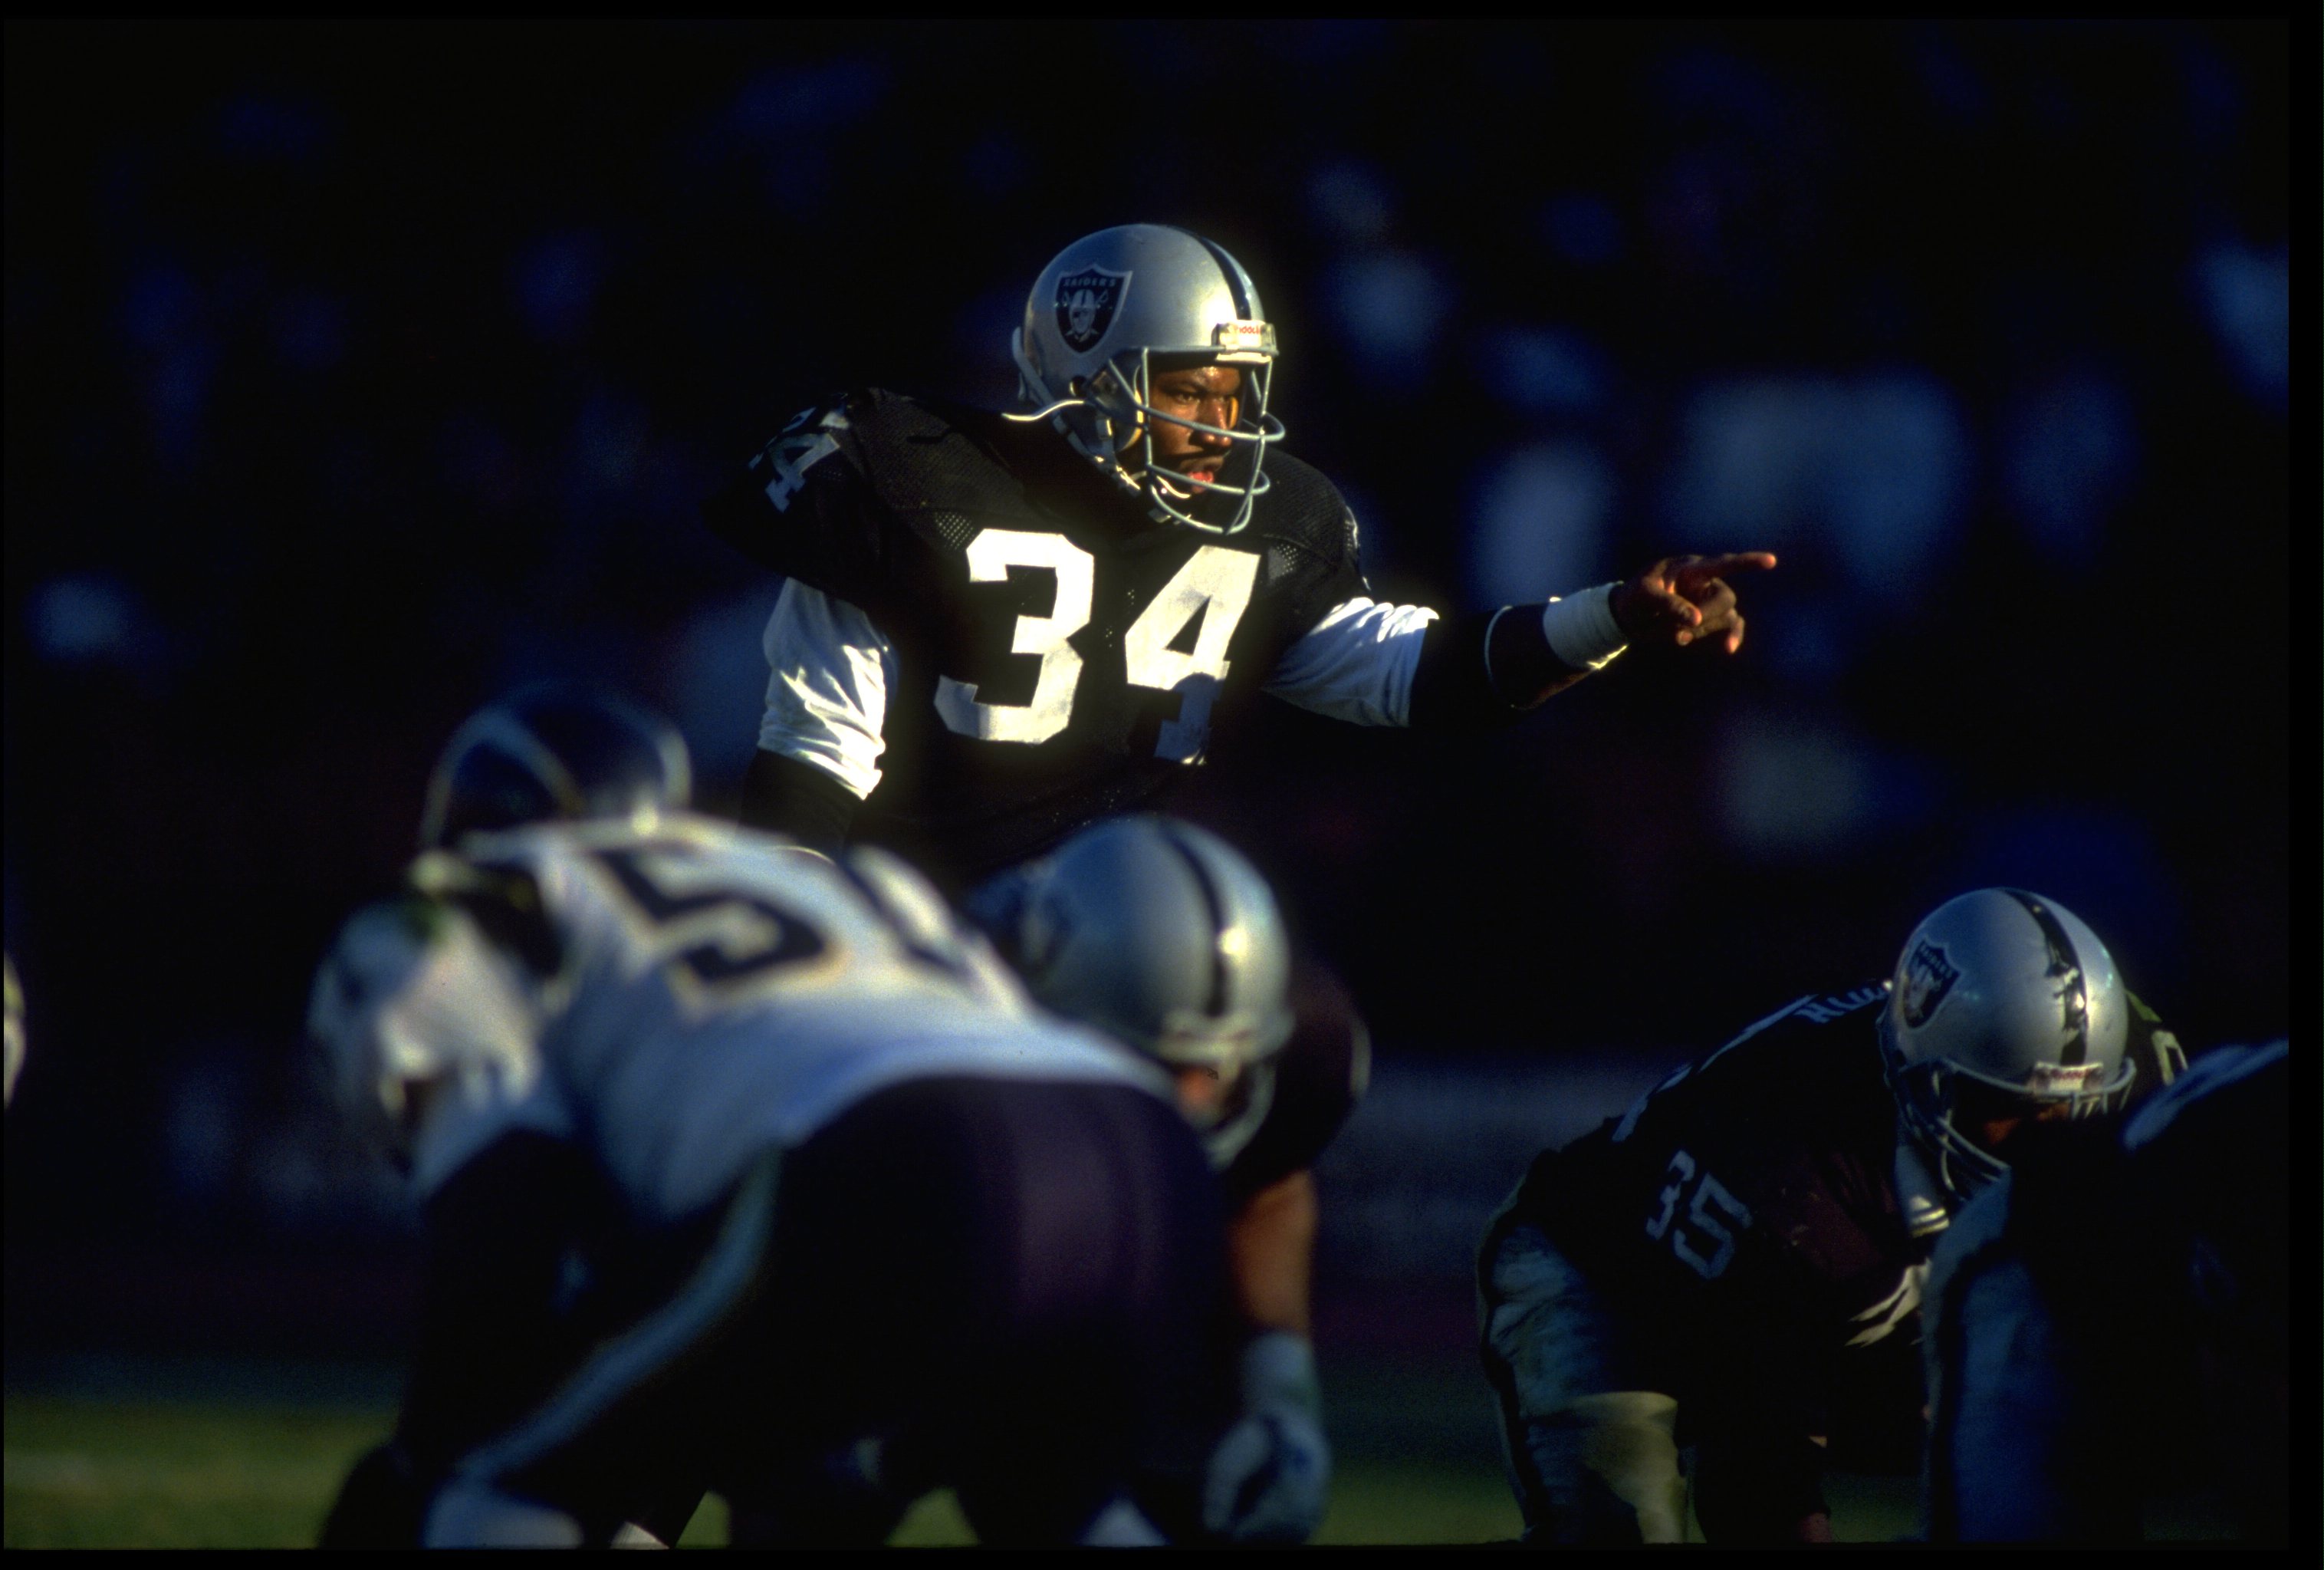 30 DEC 1990:  LOS ANGELES RAIDERS RUNNING BACK BO JACKSON POINTS OUT THE SAN DIEGO CHARGERS DEFENSE DURING THE RAIDERS 17-12 AT THE LOS ANGELES MEMORIAL COLISEUM IN LOS ANGELES, CALIFORNIA.